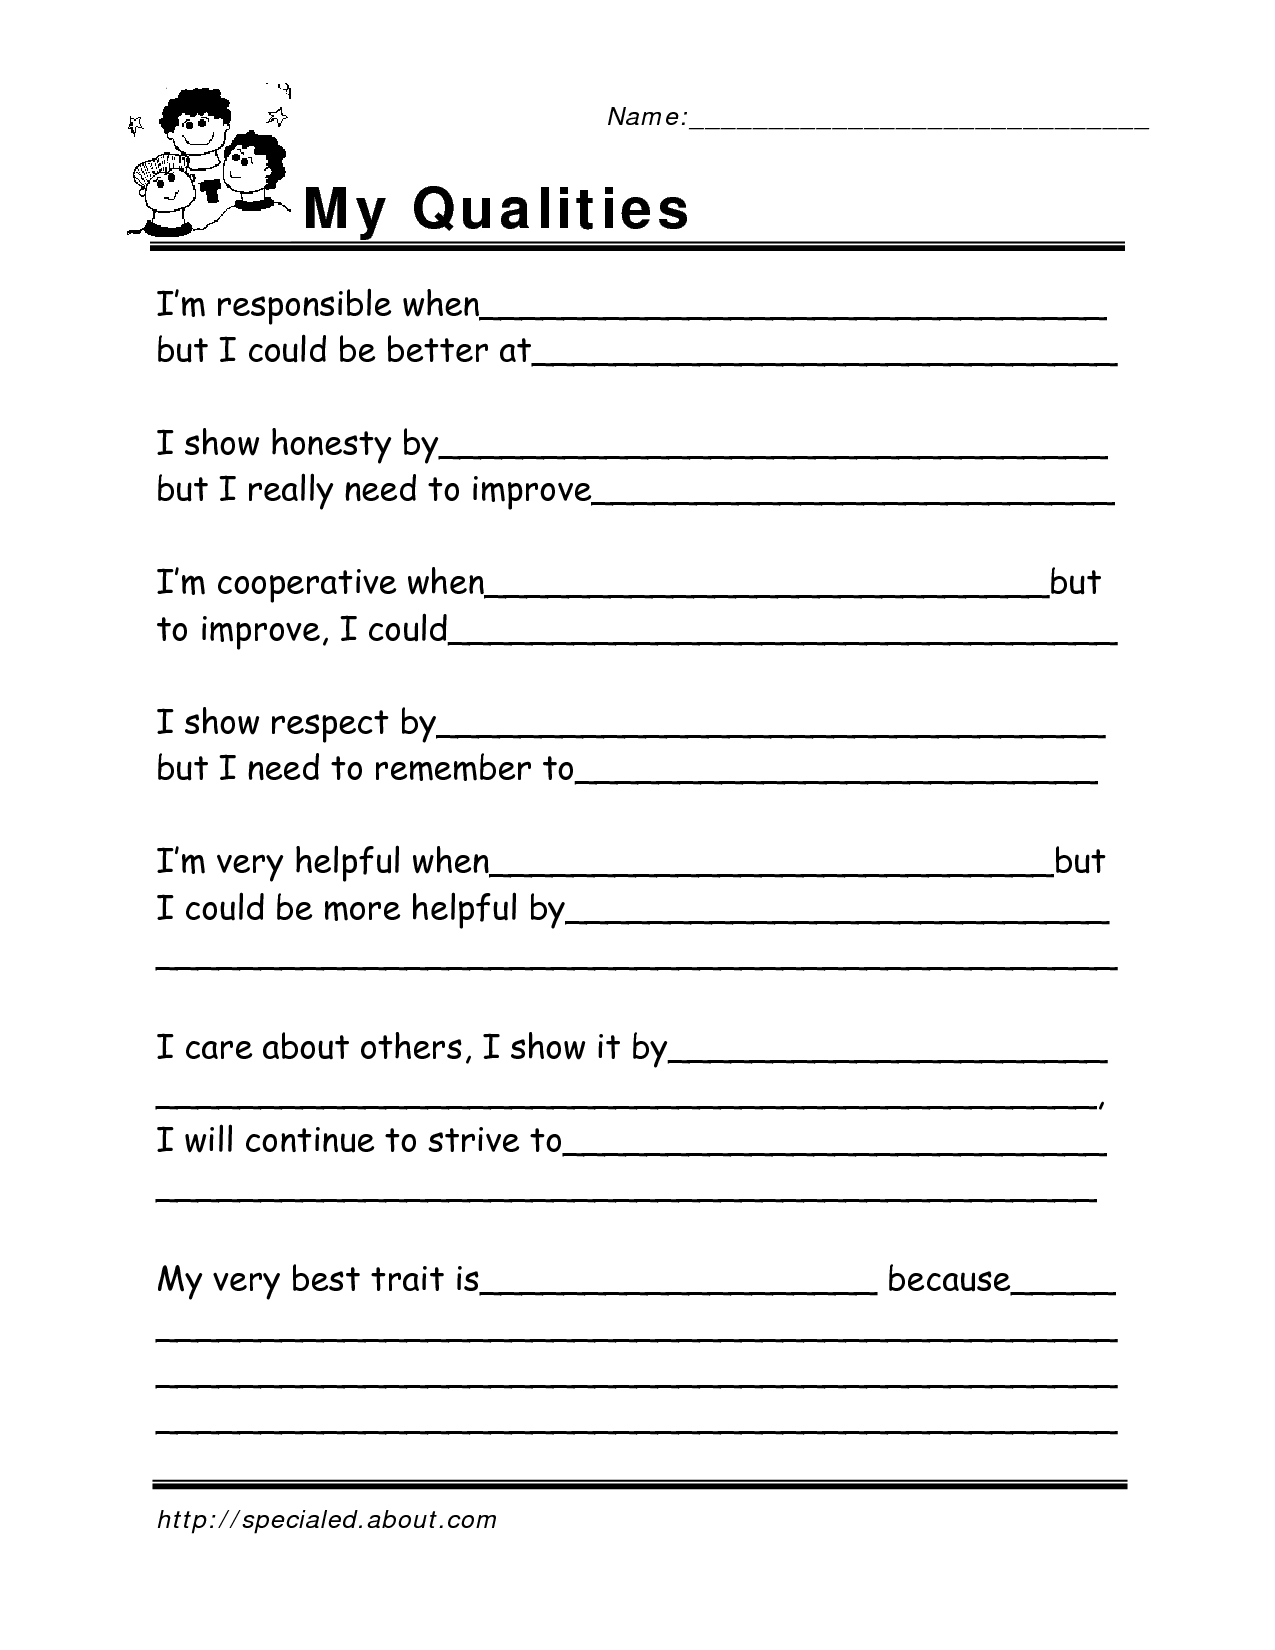 19-codependency-worksheets-for-adults-worksheeto